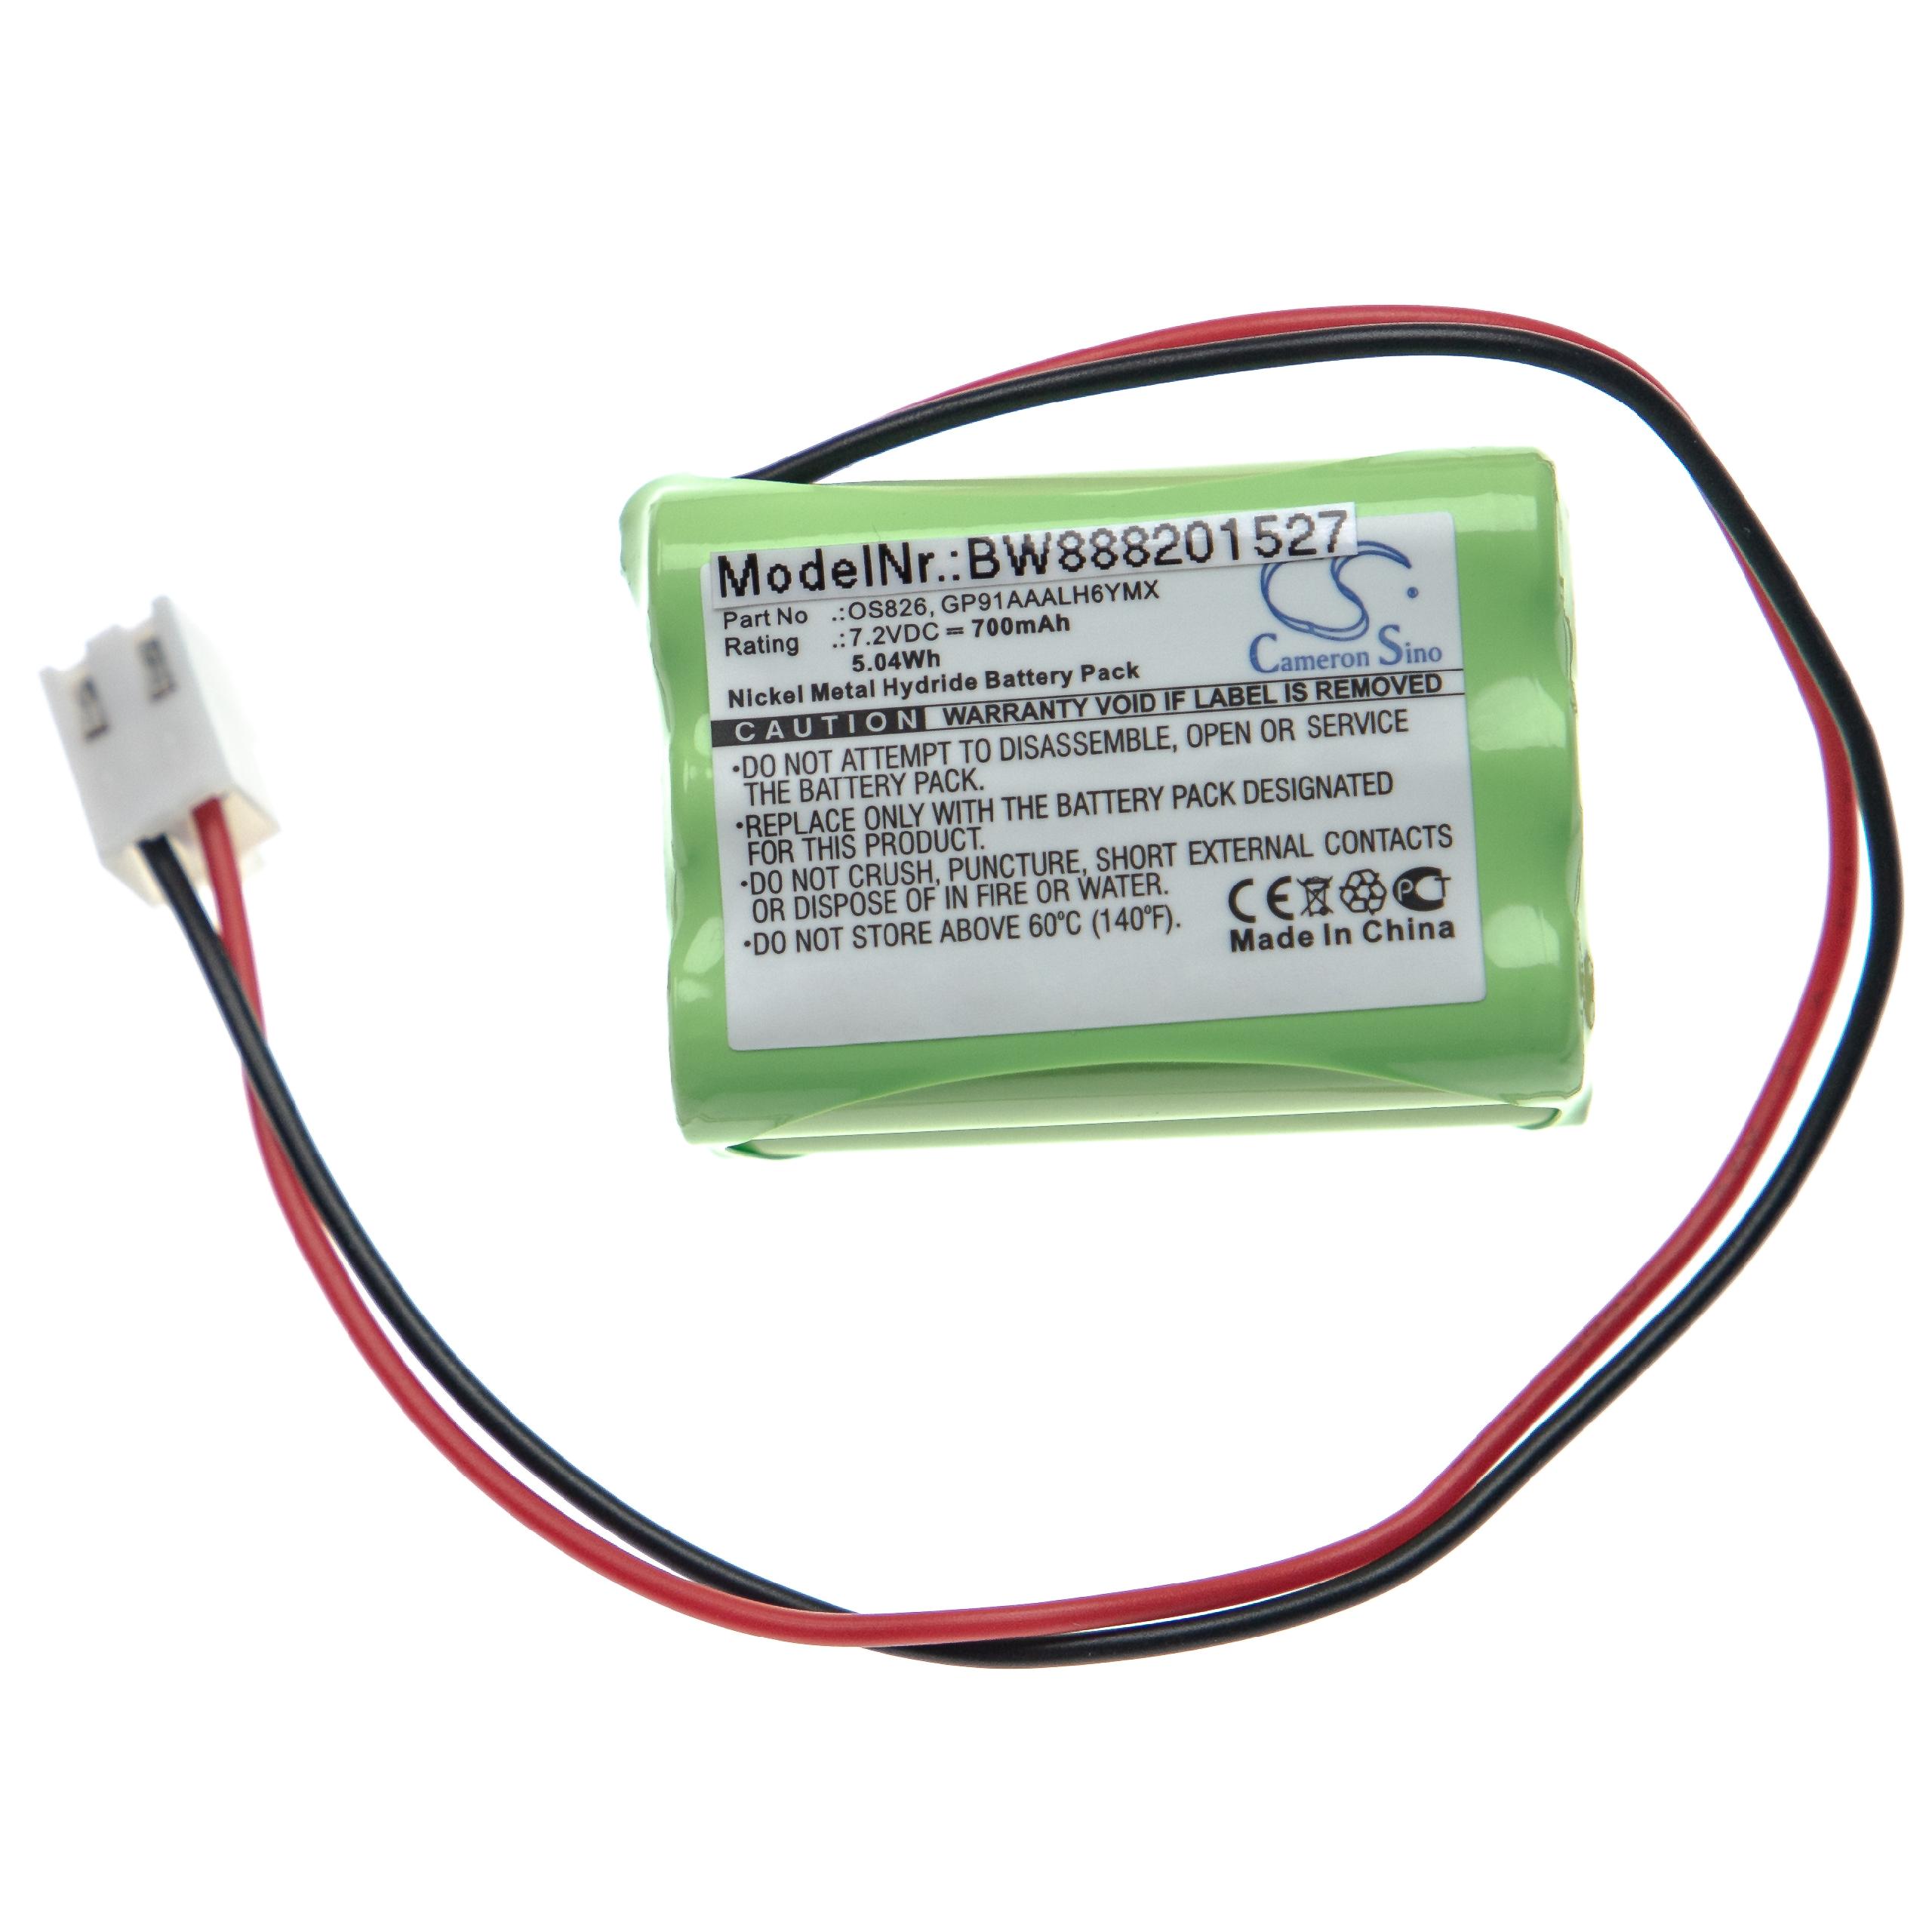 Alarm System Battery Replacement for GP1000AAAH6YMX, GP150AAAM6YMX, GP11AAAH6YMX - 700mAh 7.2V NiMH